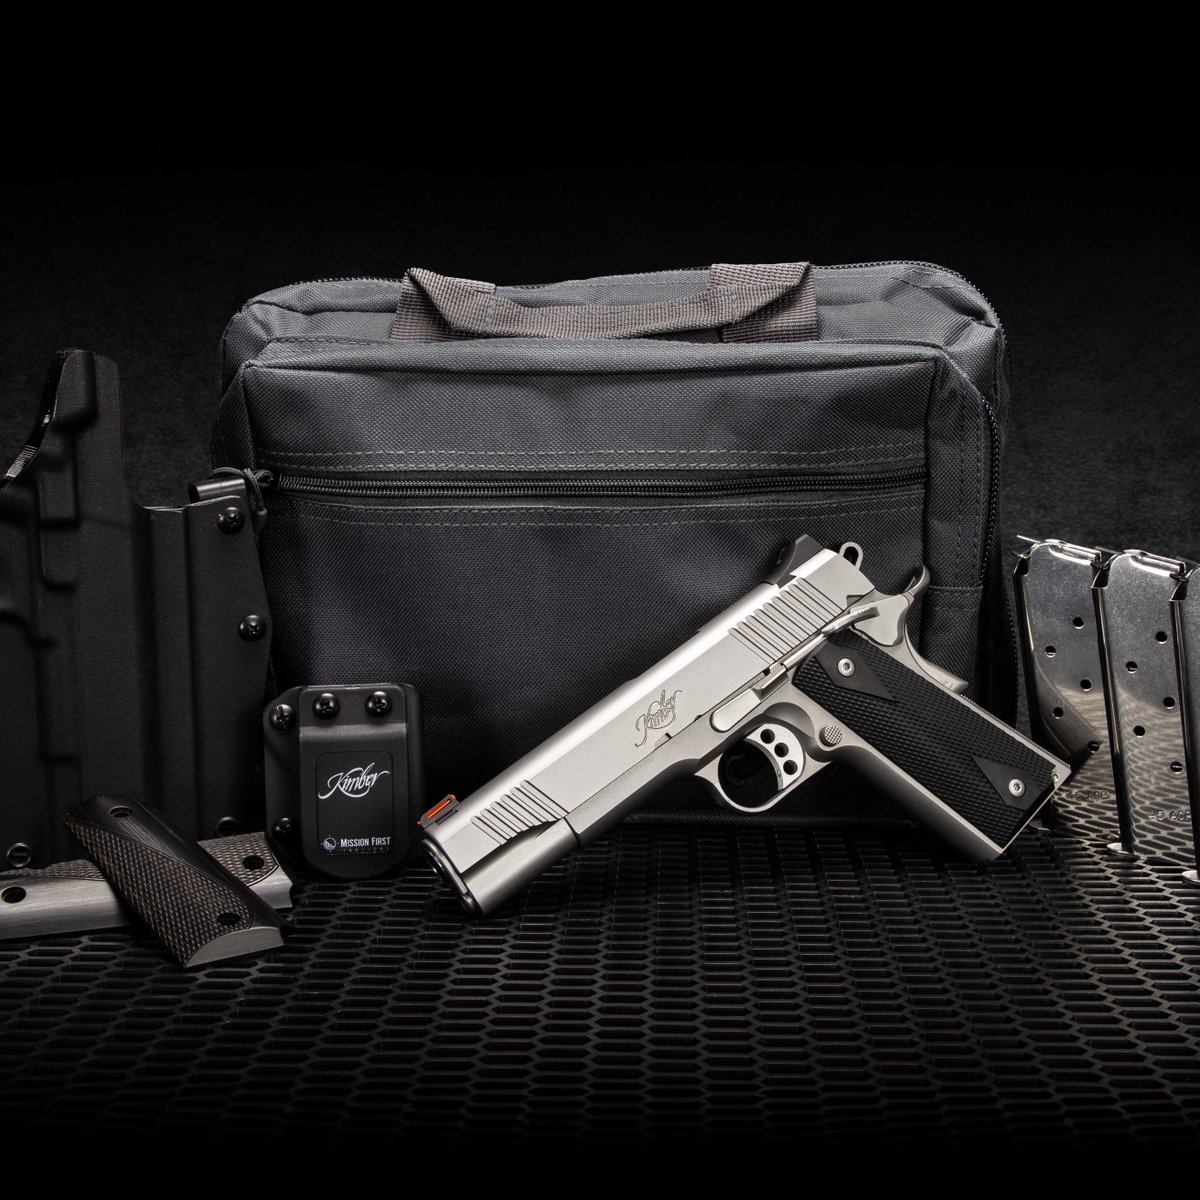 The Kimber Stainless II California Bundle- 1911 Stainless II, one set of black diamond wood grips, three 7-round magazines, one Mission First tactical holster, and one Kimber range bag.